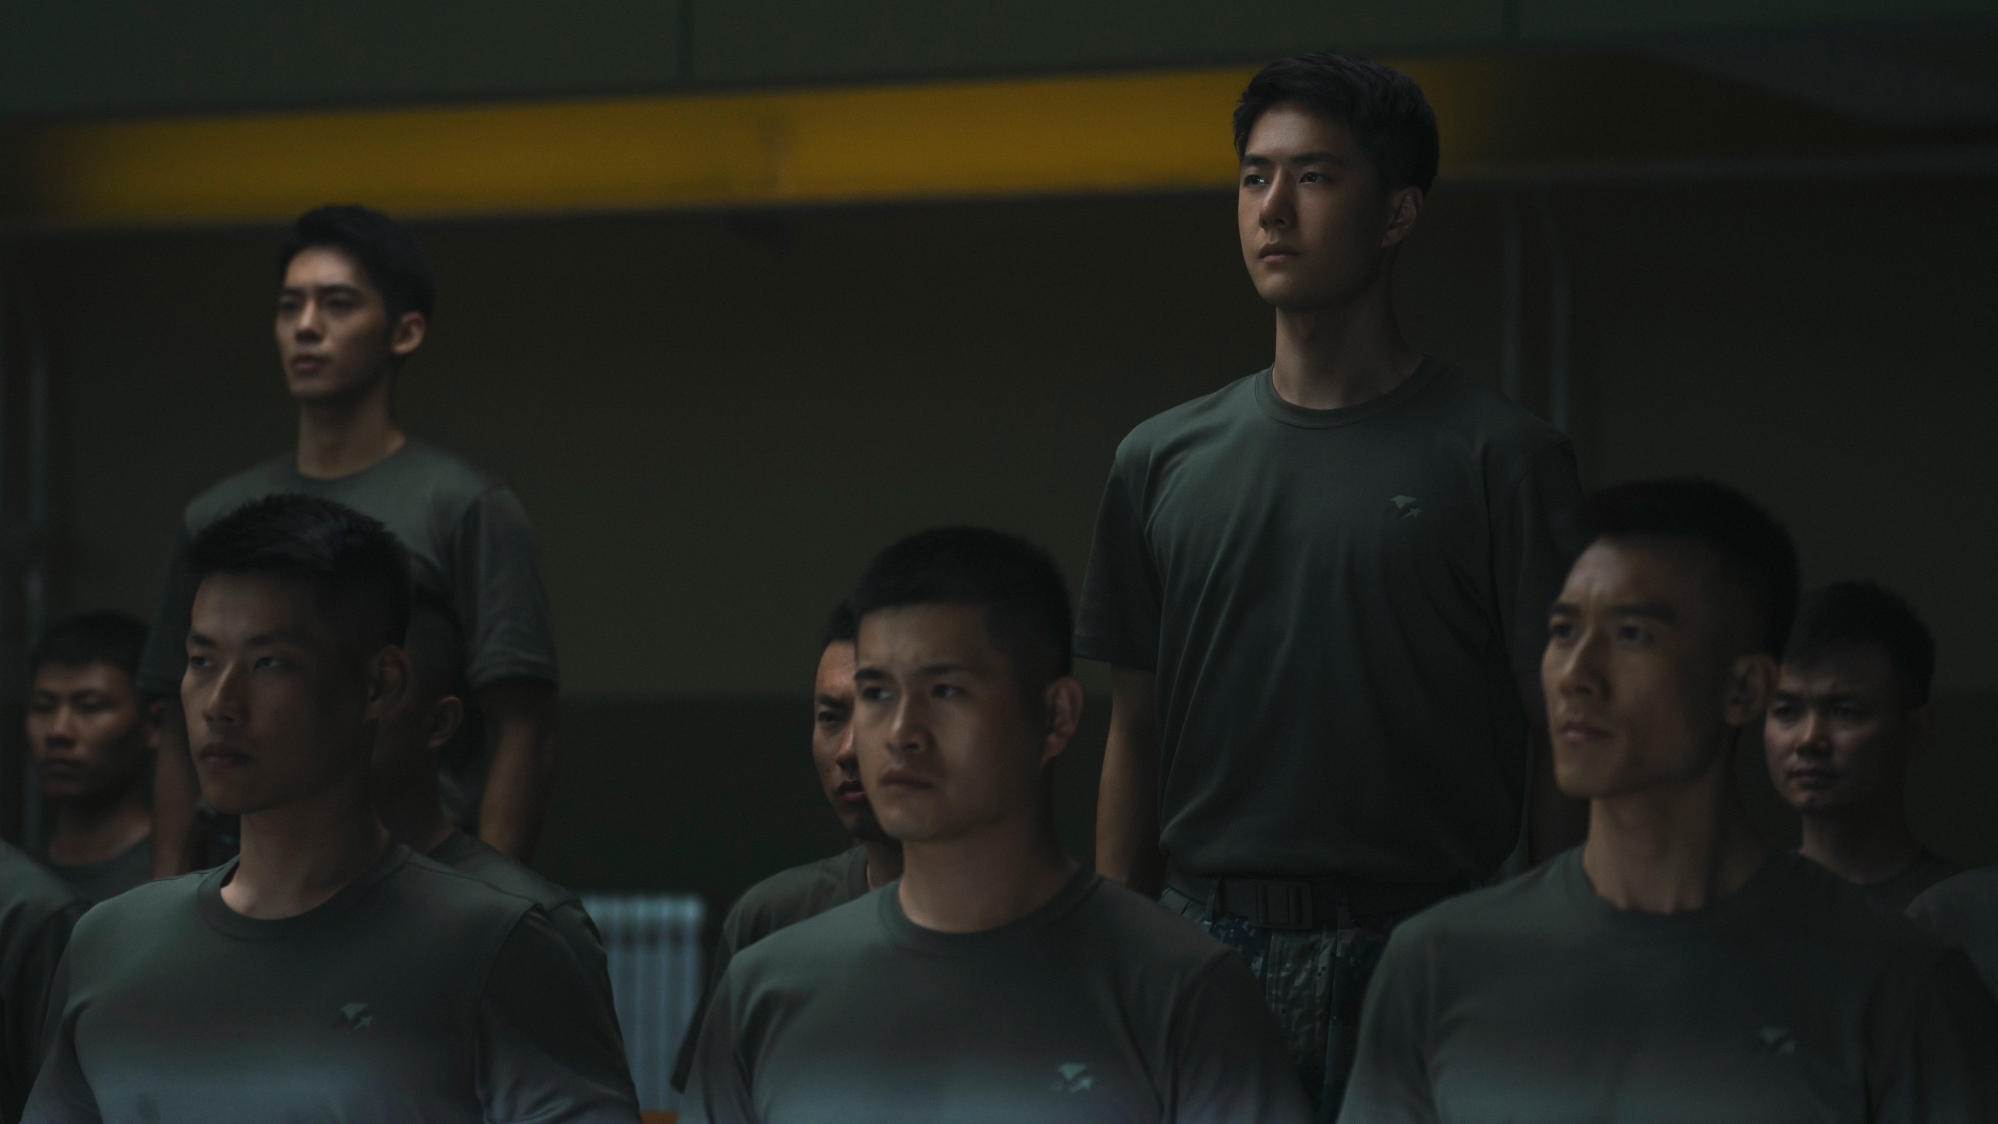 Wang Yibo (top right) in a still from “Born to Fly”.